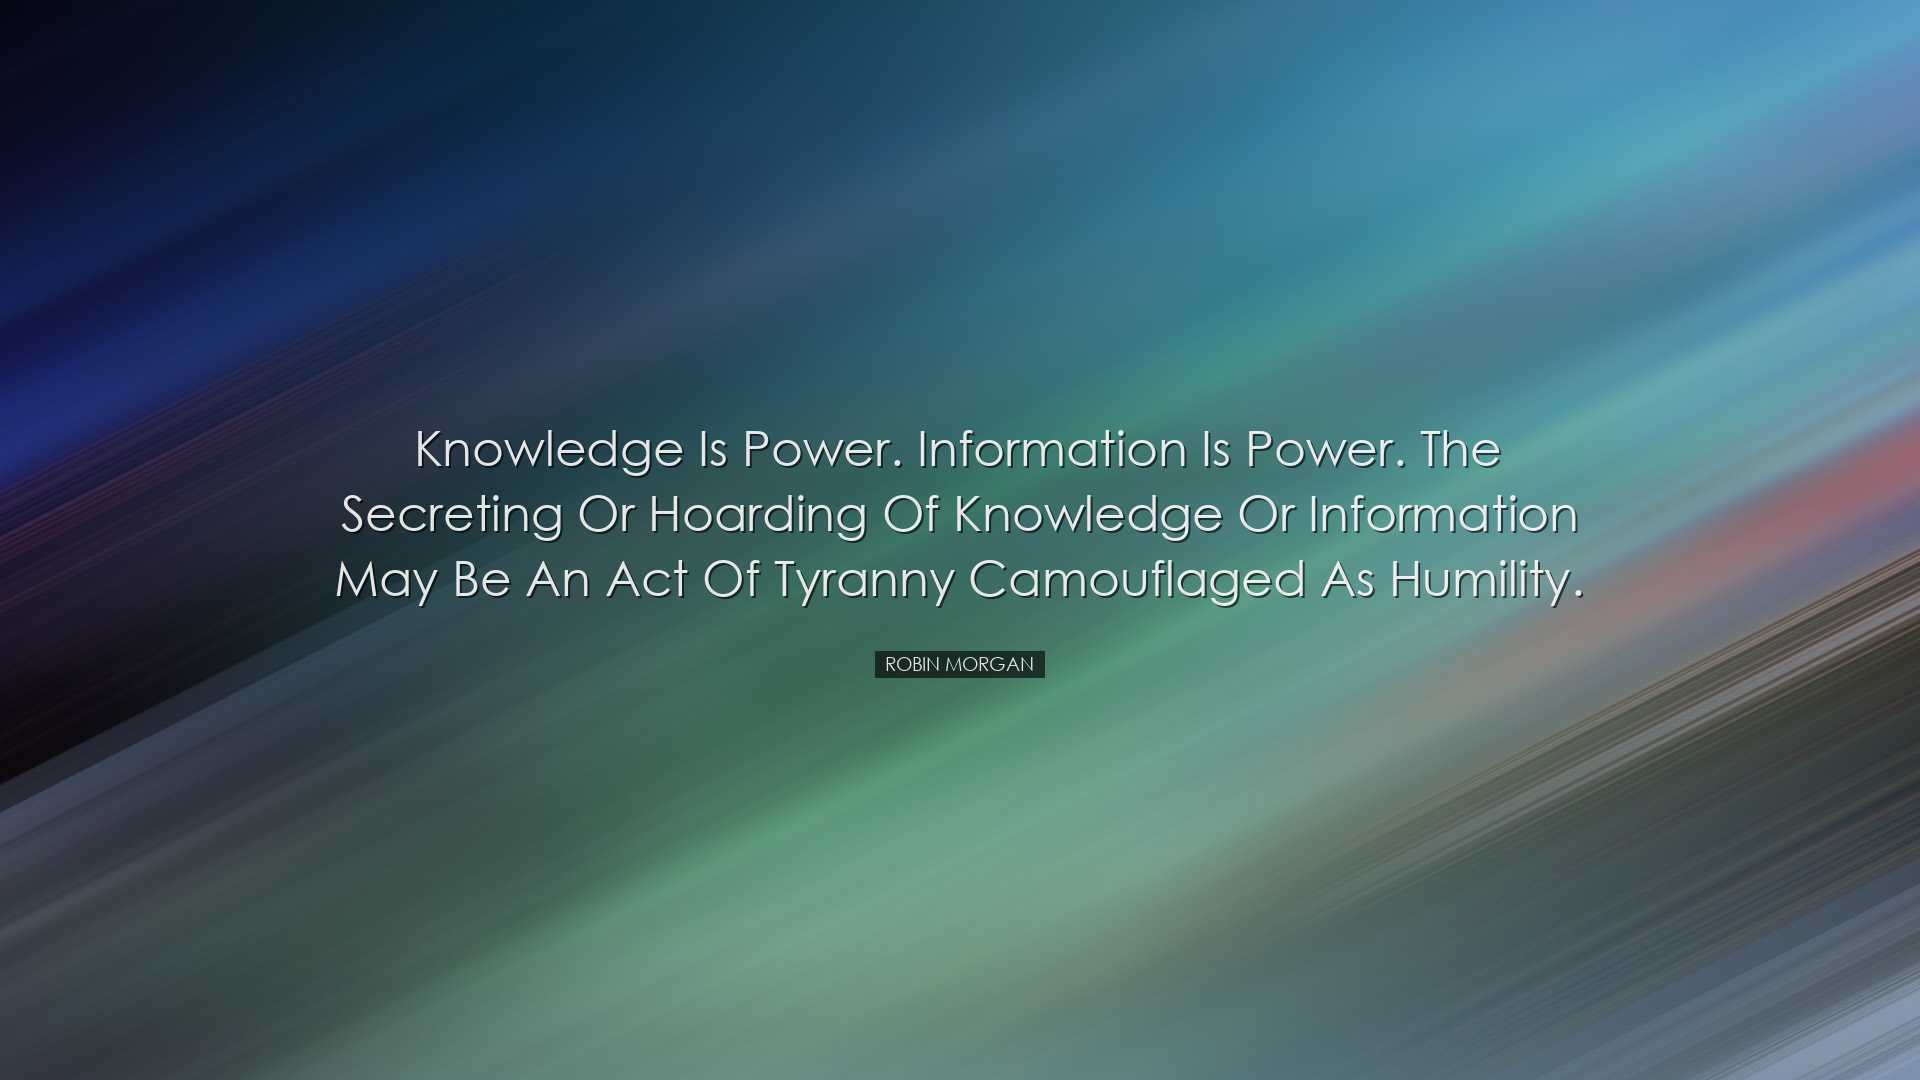 Knowledge is power. Information is power. The secreting or hoardin